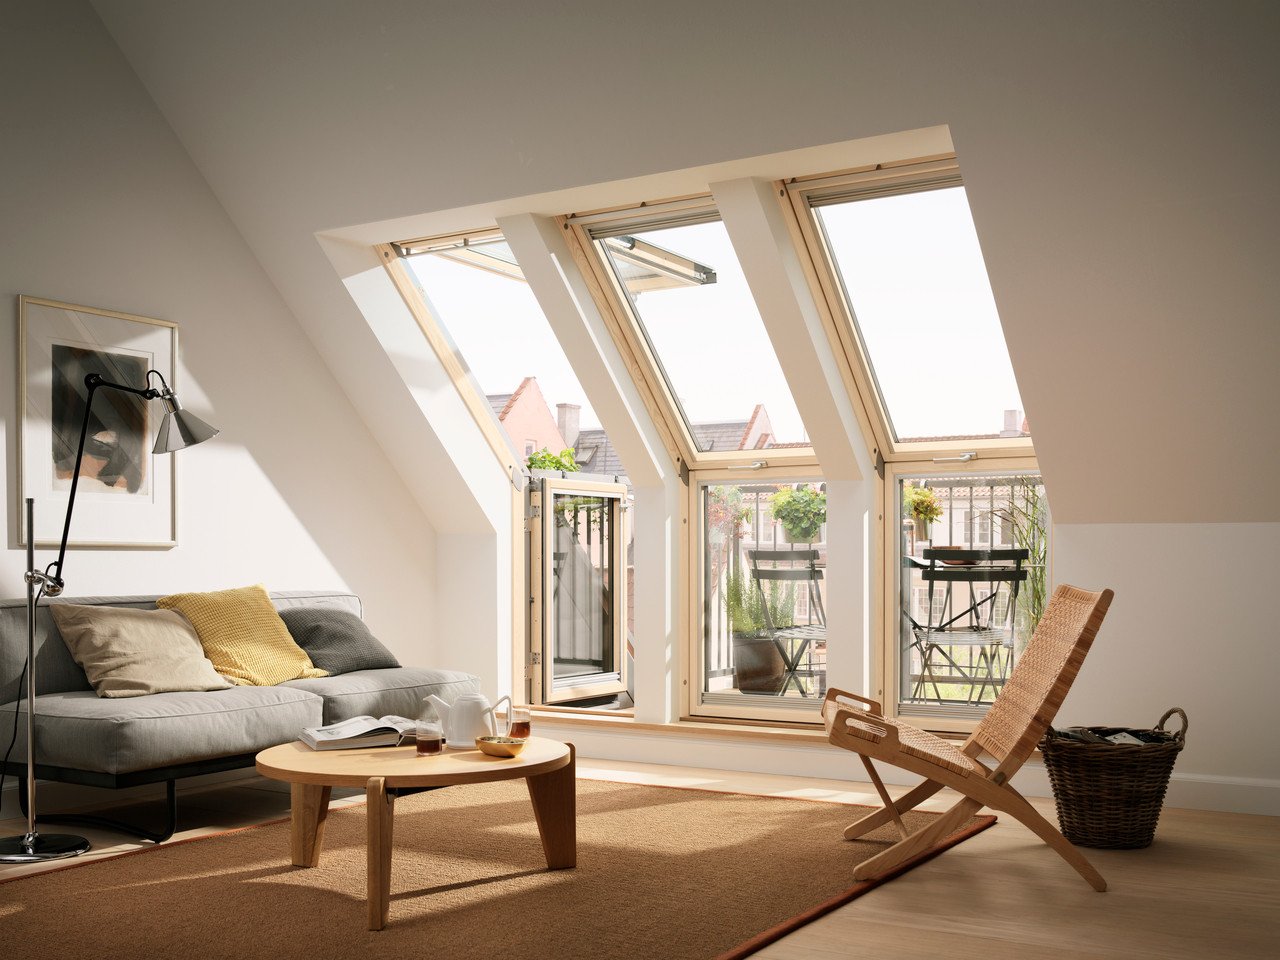 How to ensure that there is plenty of natural light in the house?